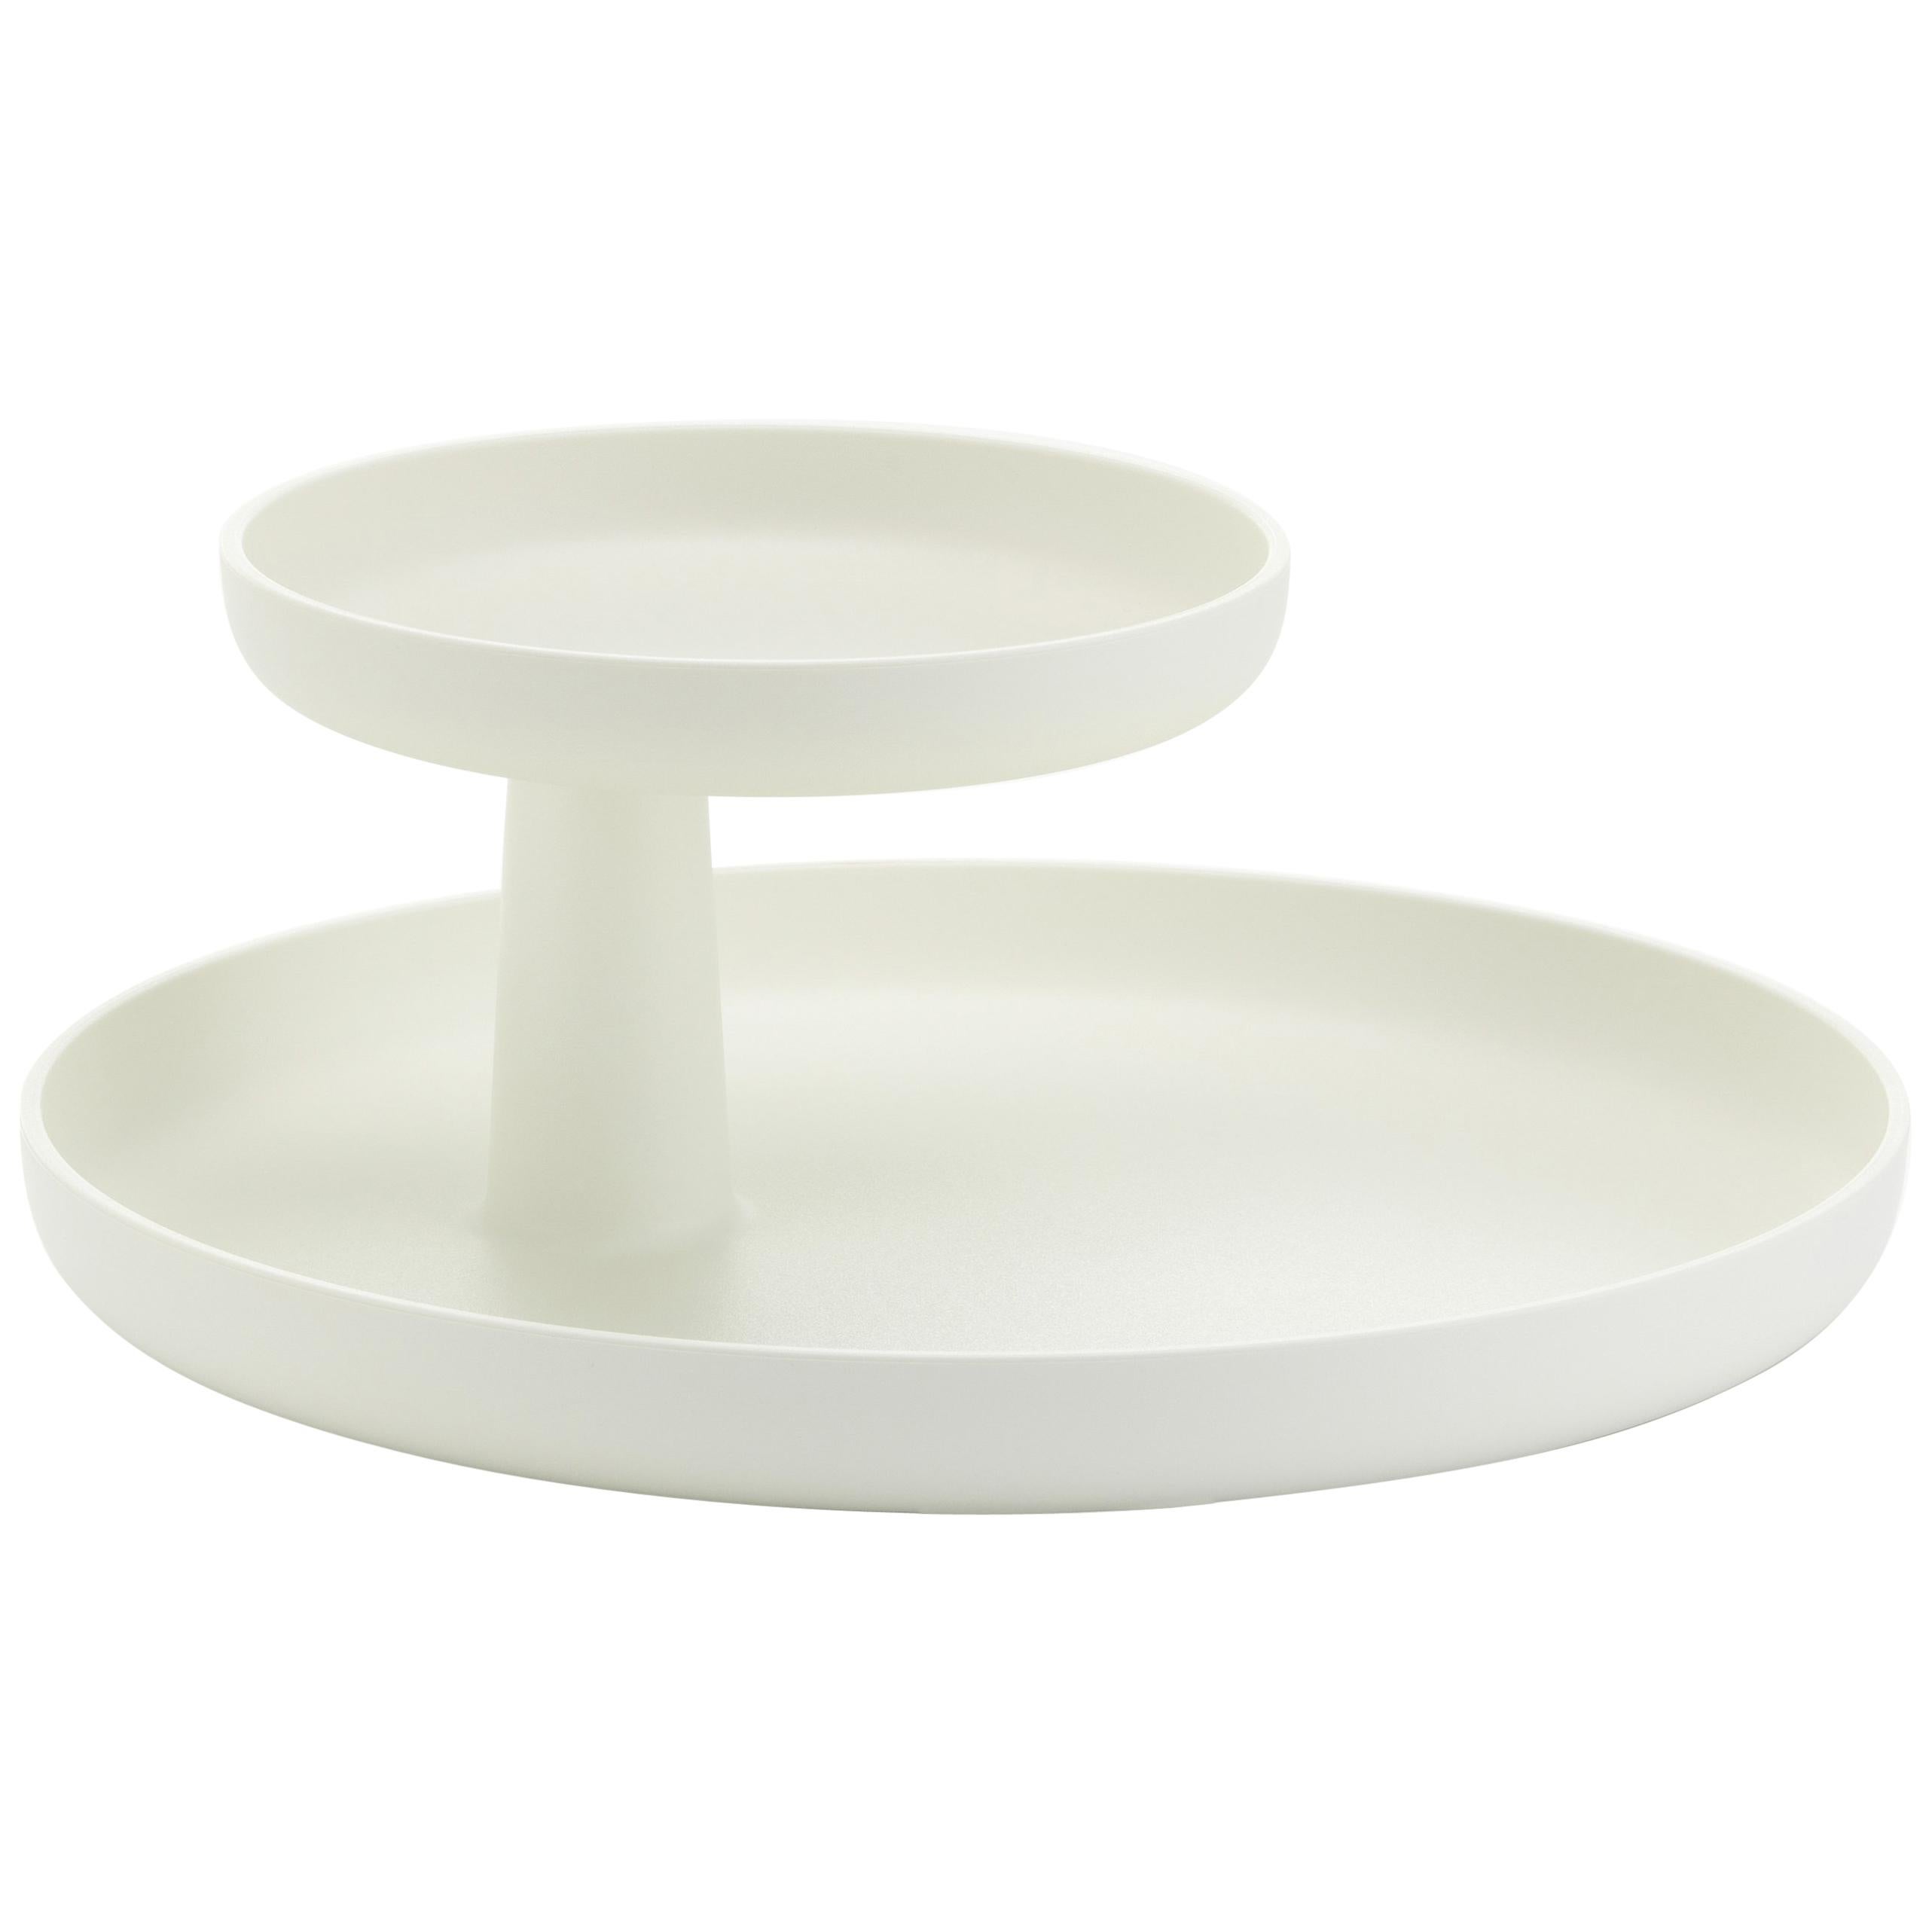 Vitra Rotary Tray in White by Jasper Morrison For Sale